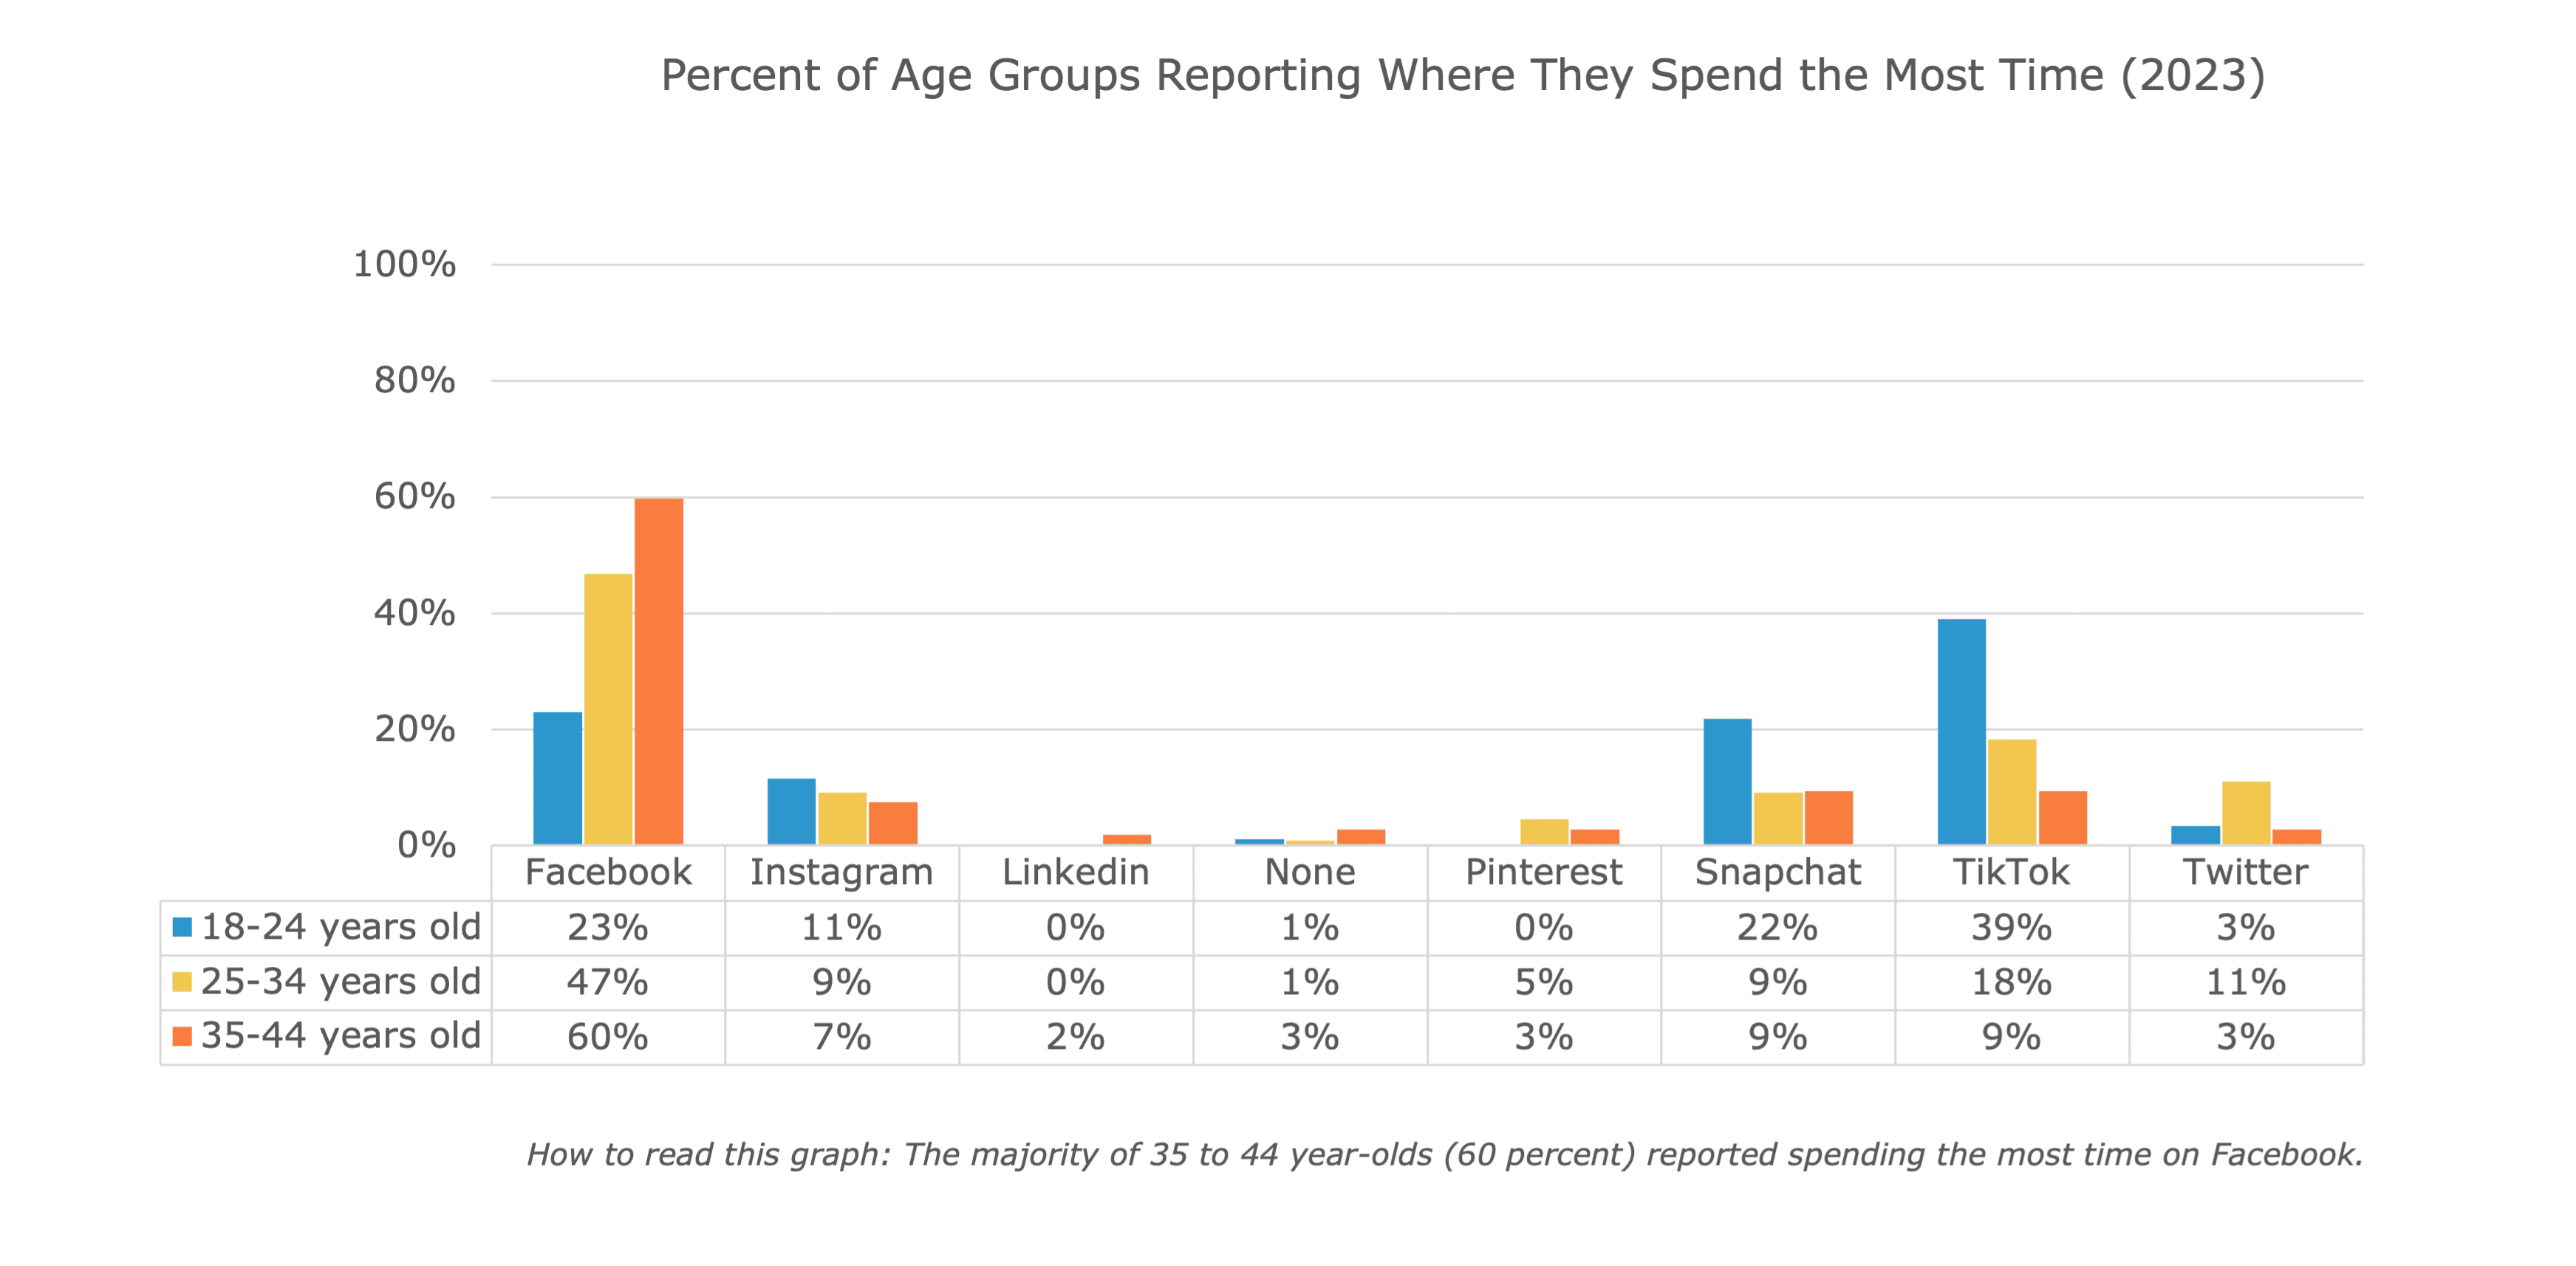 Percentage of age groups where they spend the most time on graph in 2023.